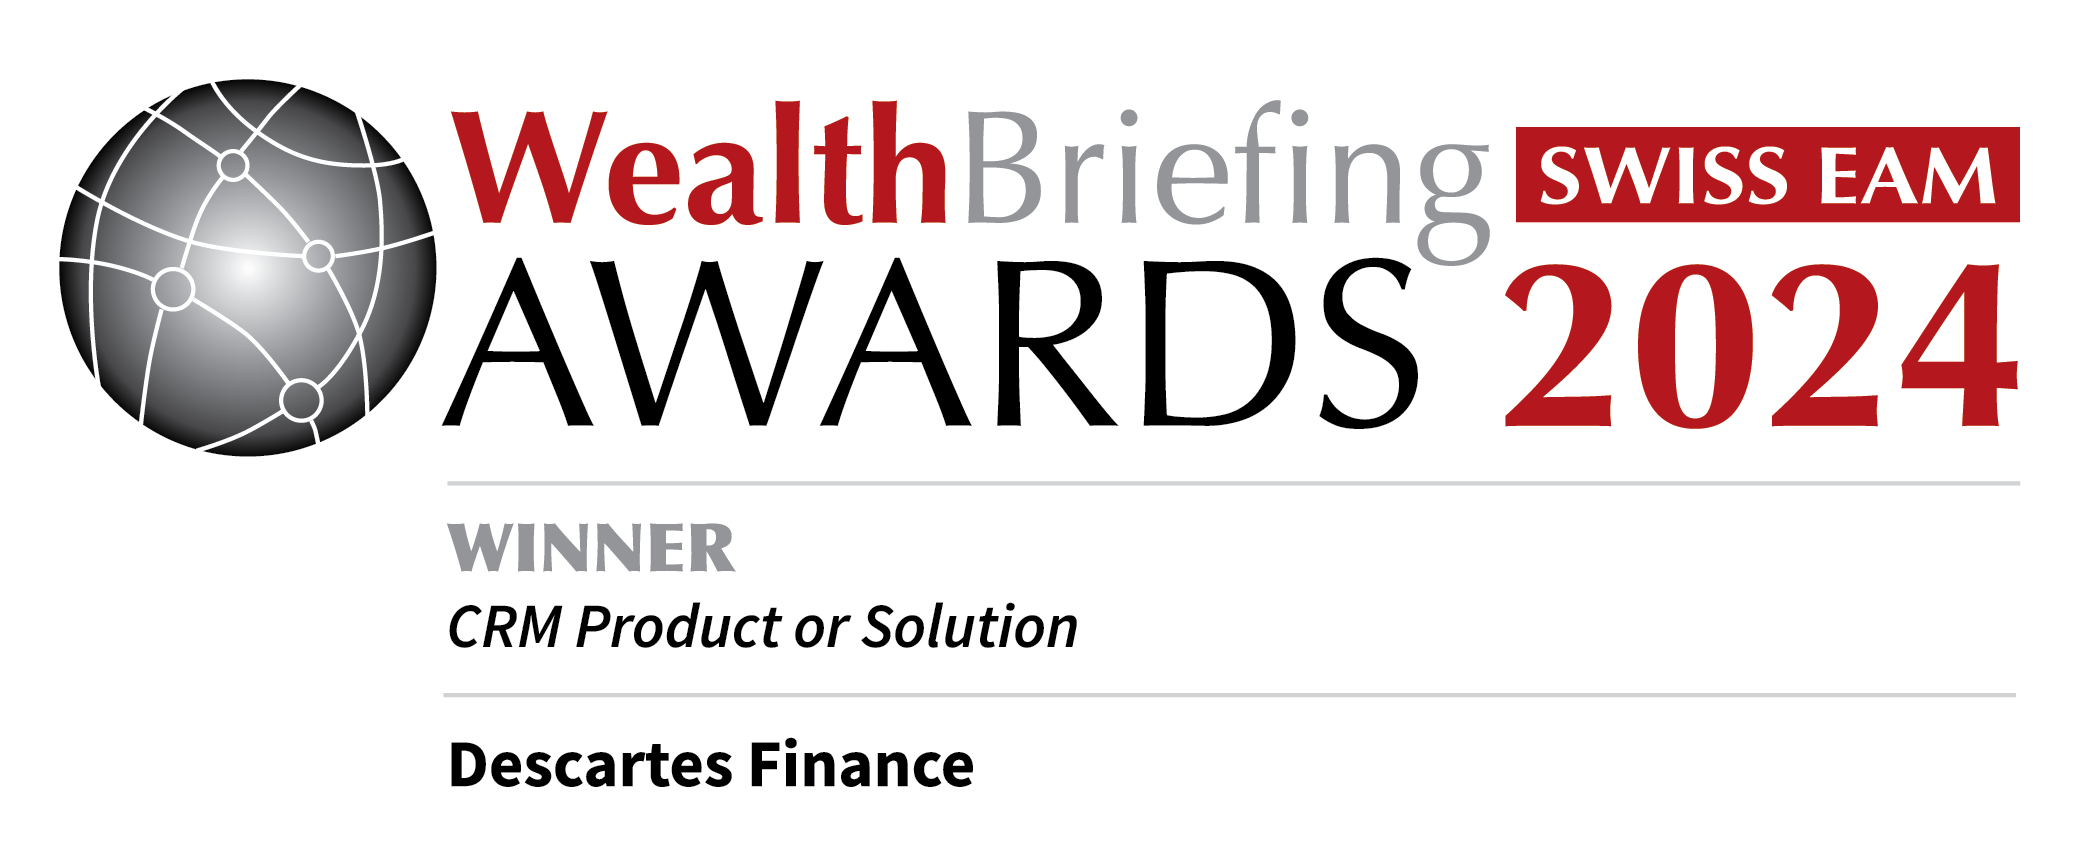 WealthBriefing Awards 2024 - Winner in CRM Product or Solution